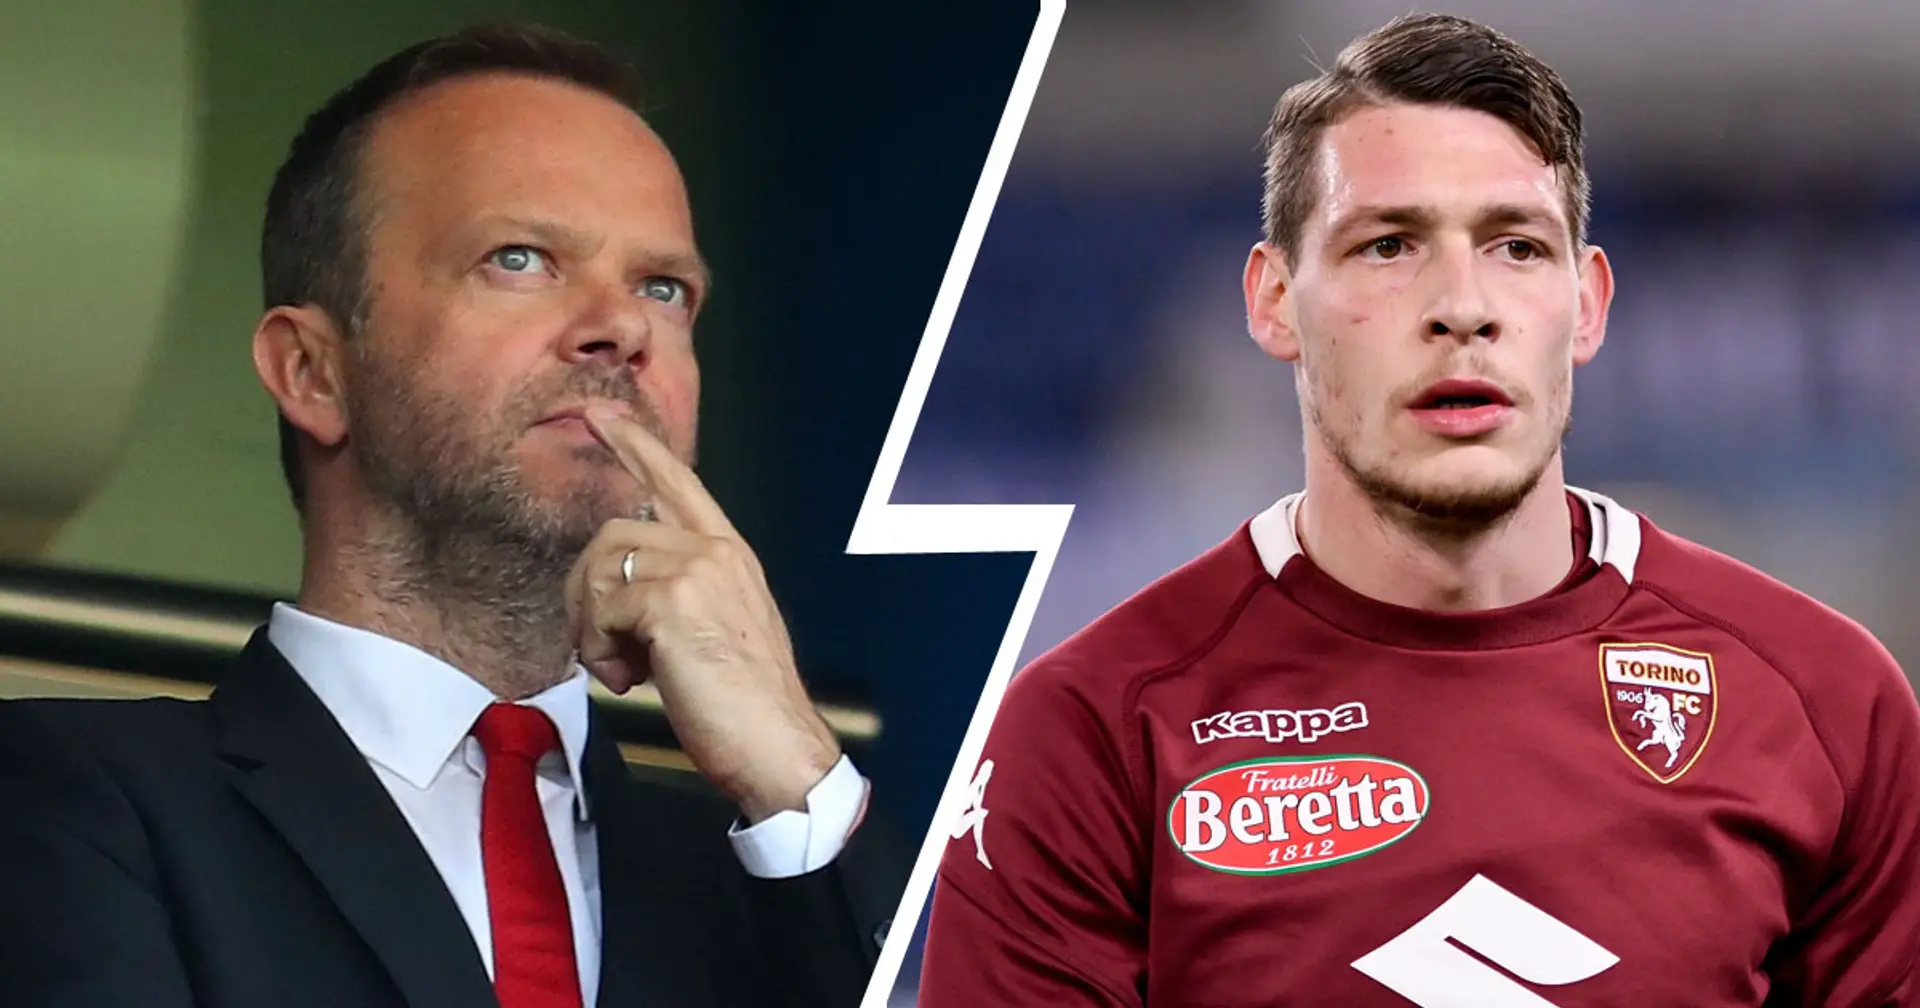 United said to have been offered Torino’s Andrea Belotti, shown no interest in signing him